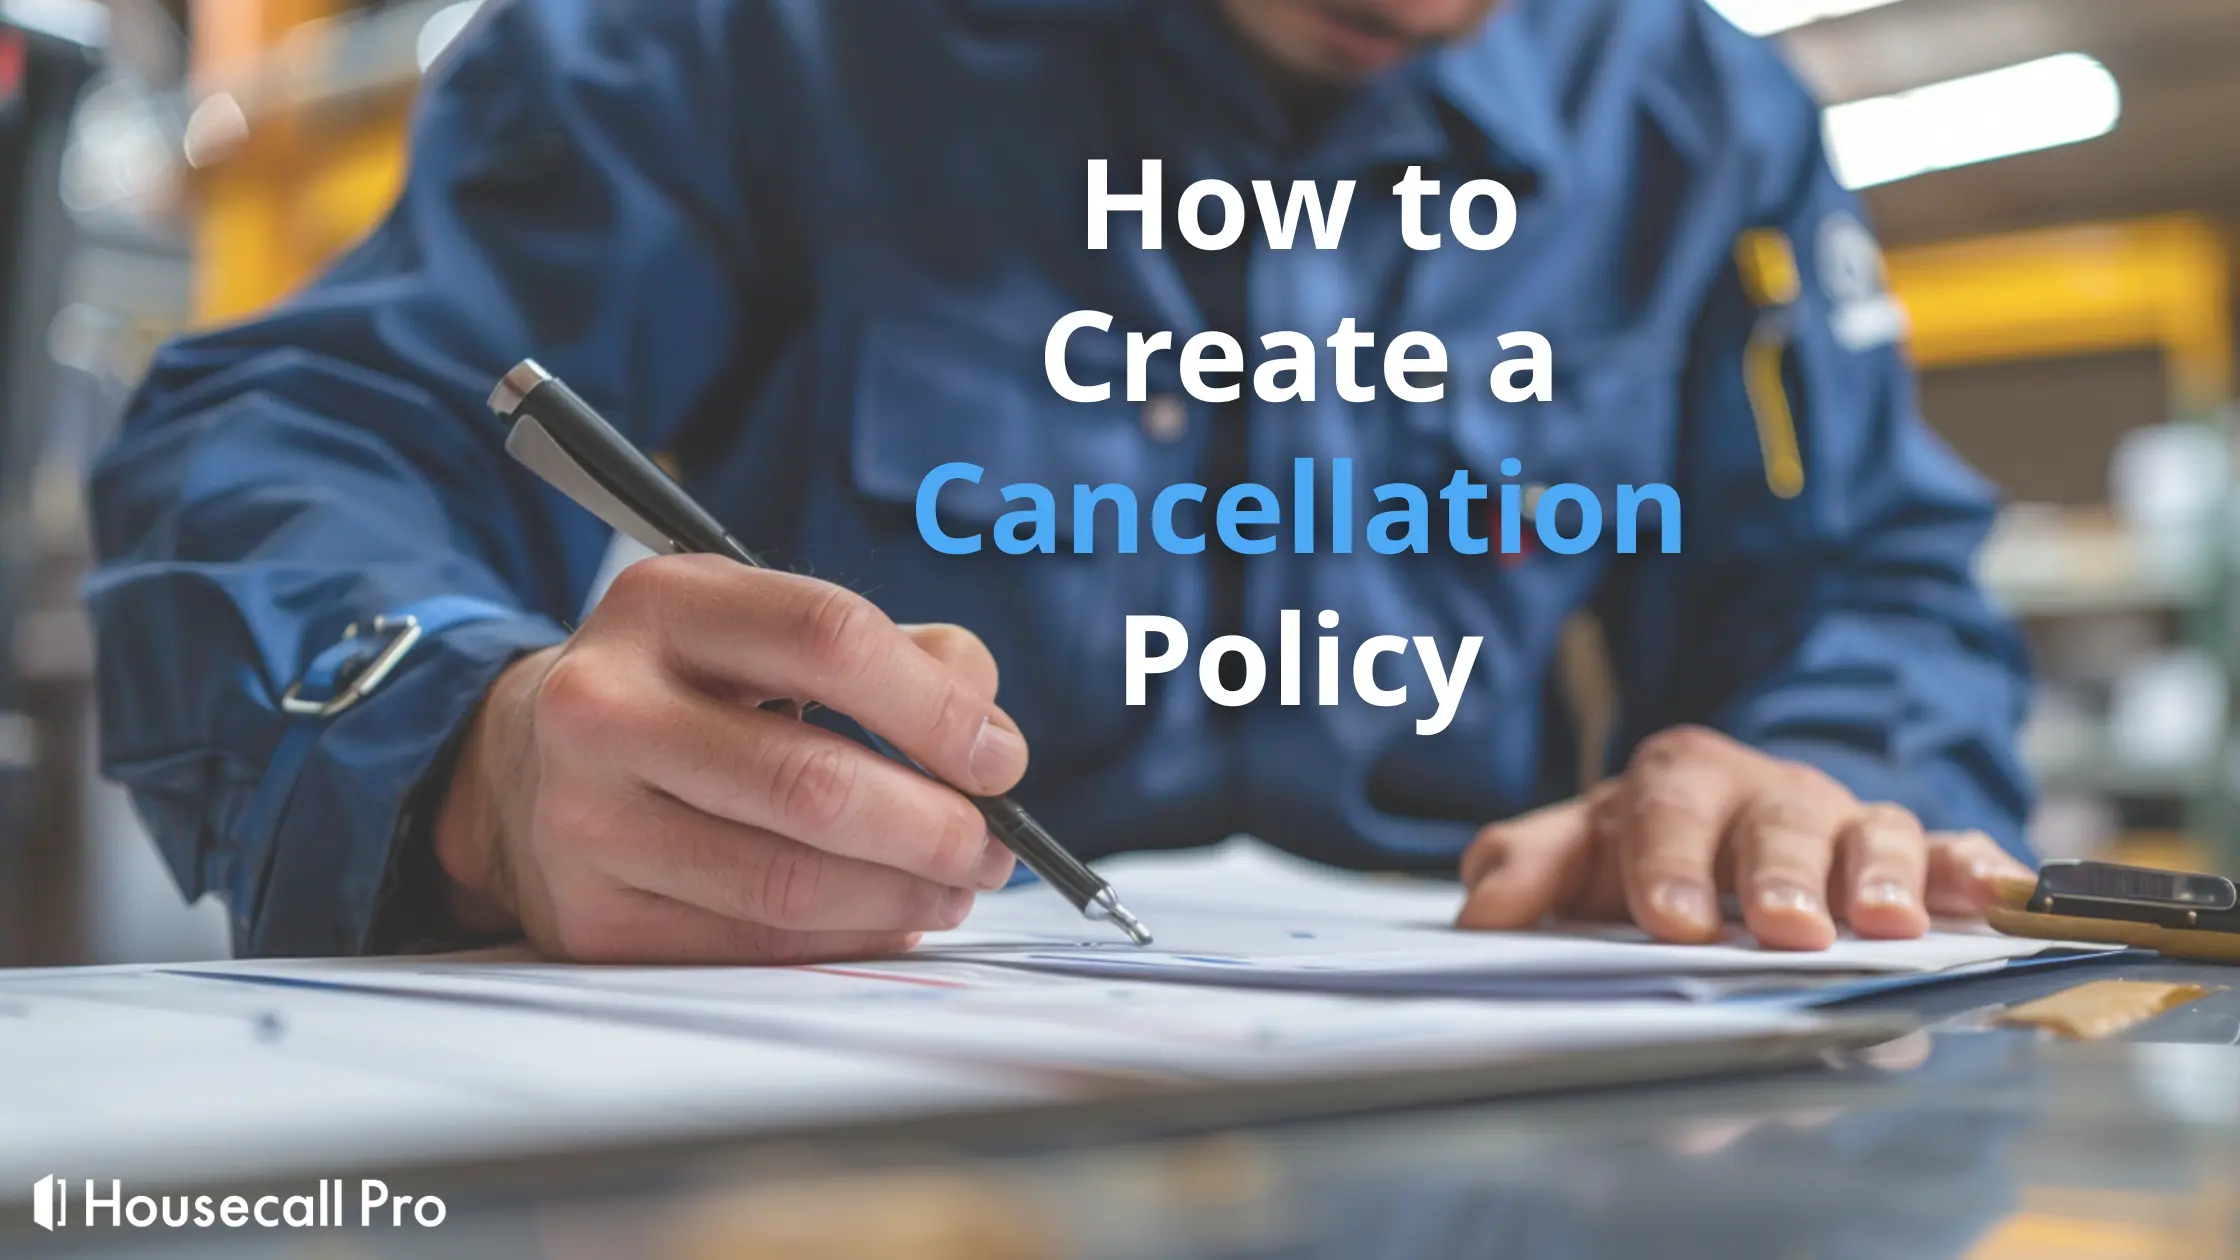 How to Create a Cancellation Policy